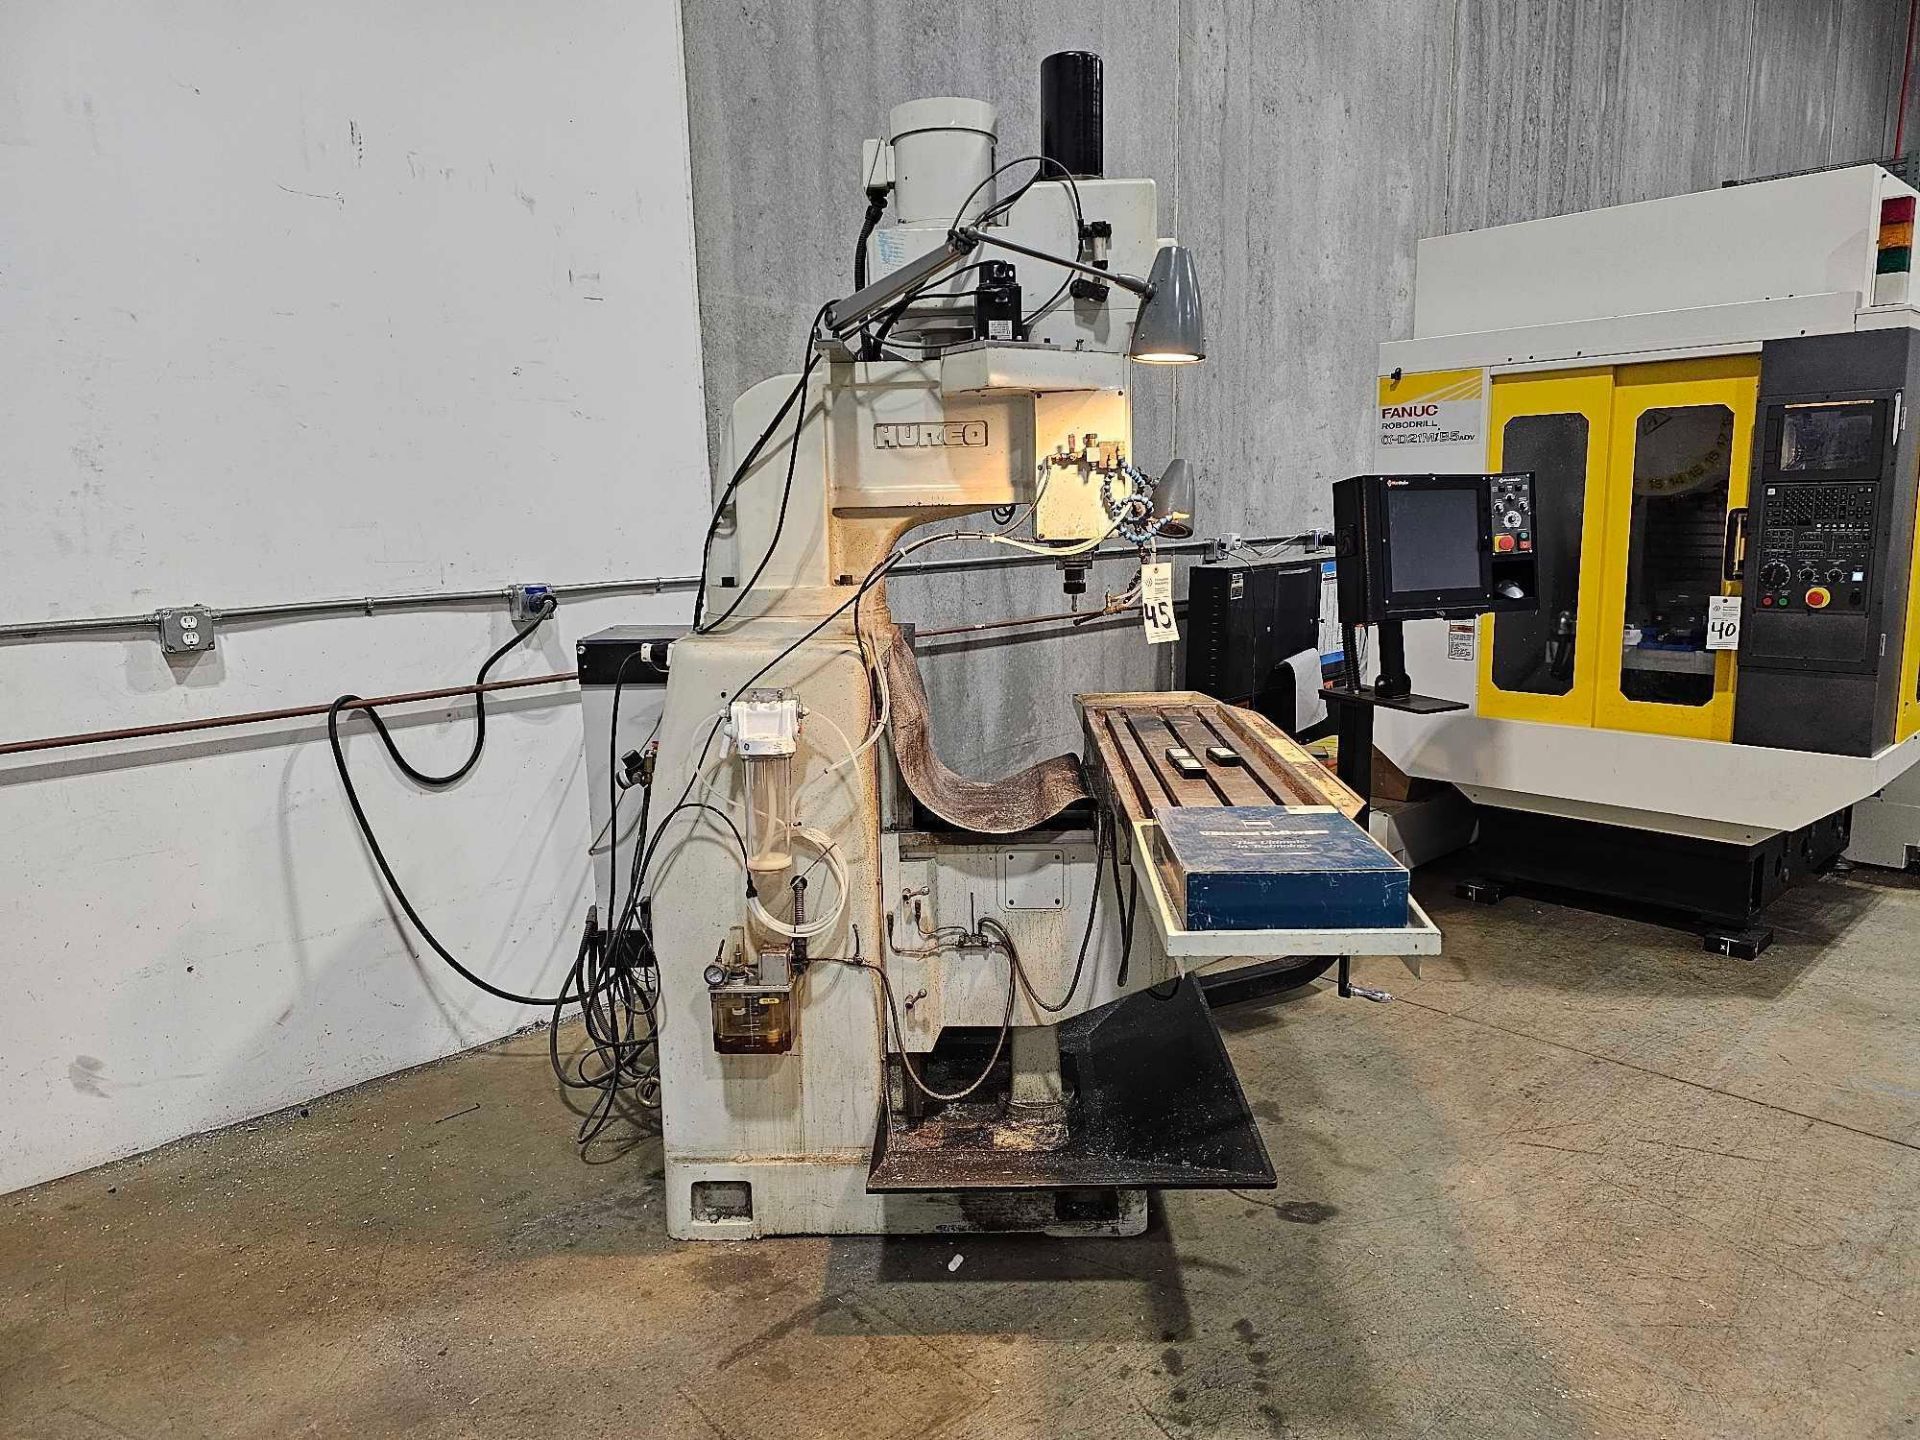 1997 HURCO HAWK 5M 3 AXIS CNC MILL WITH MACHMOTION CONTROL - Image 5 of 13